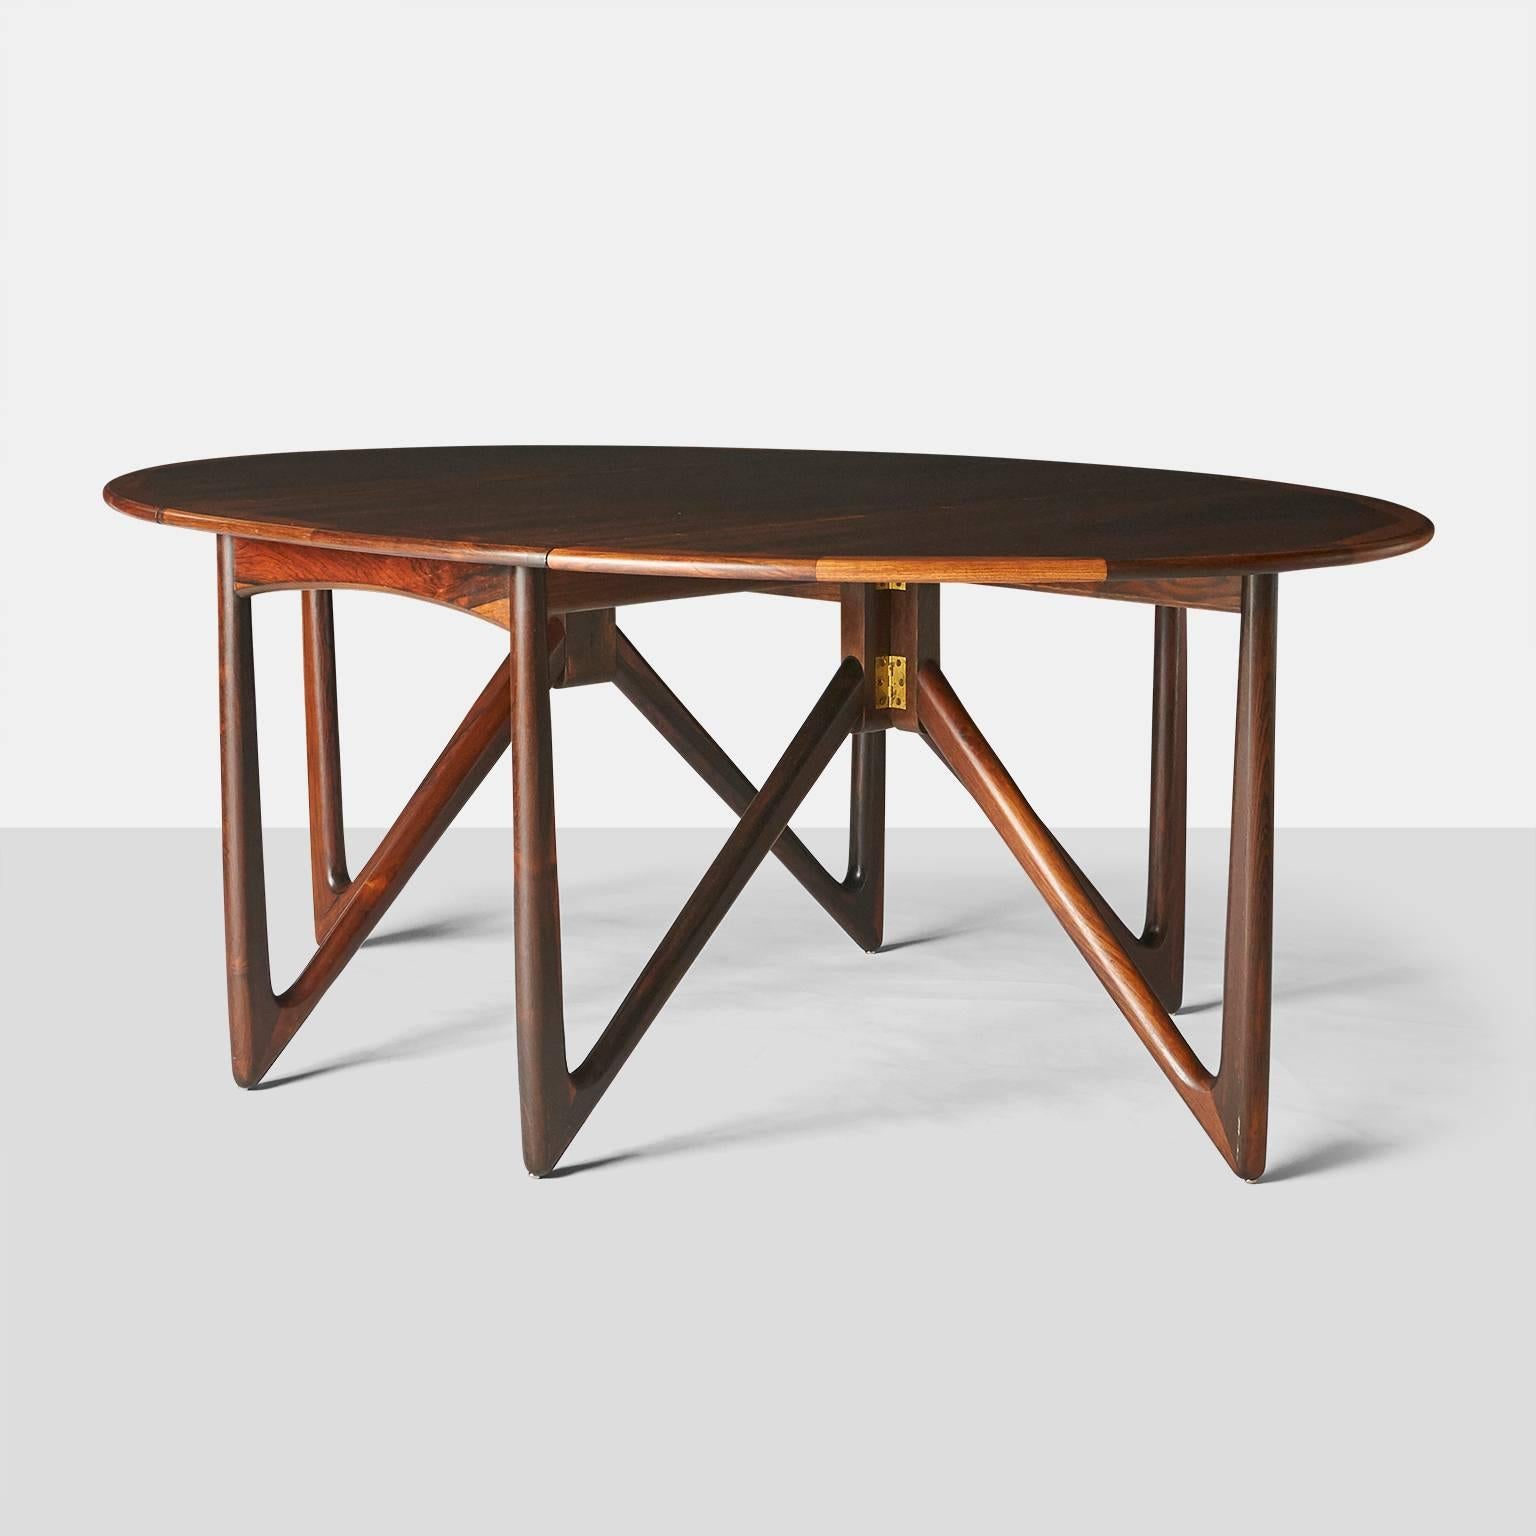 A rosewood dining table designed by Kurt Ostervig. The gatefold legs are of solid rosewood, and the table can change from a compact form to an impressive dining table that will seat eight.